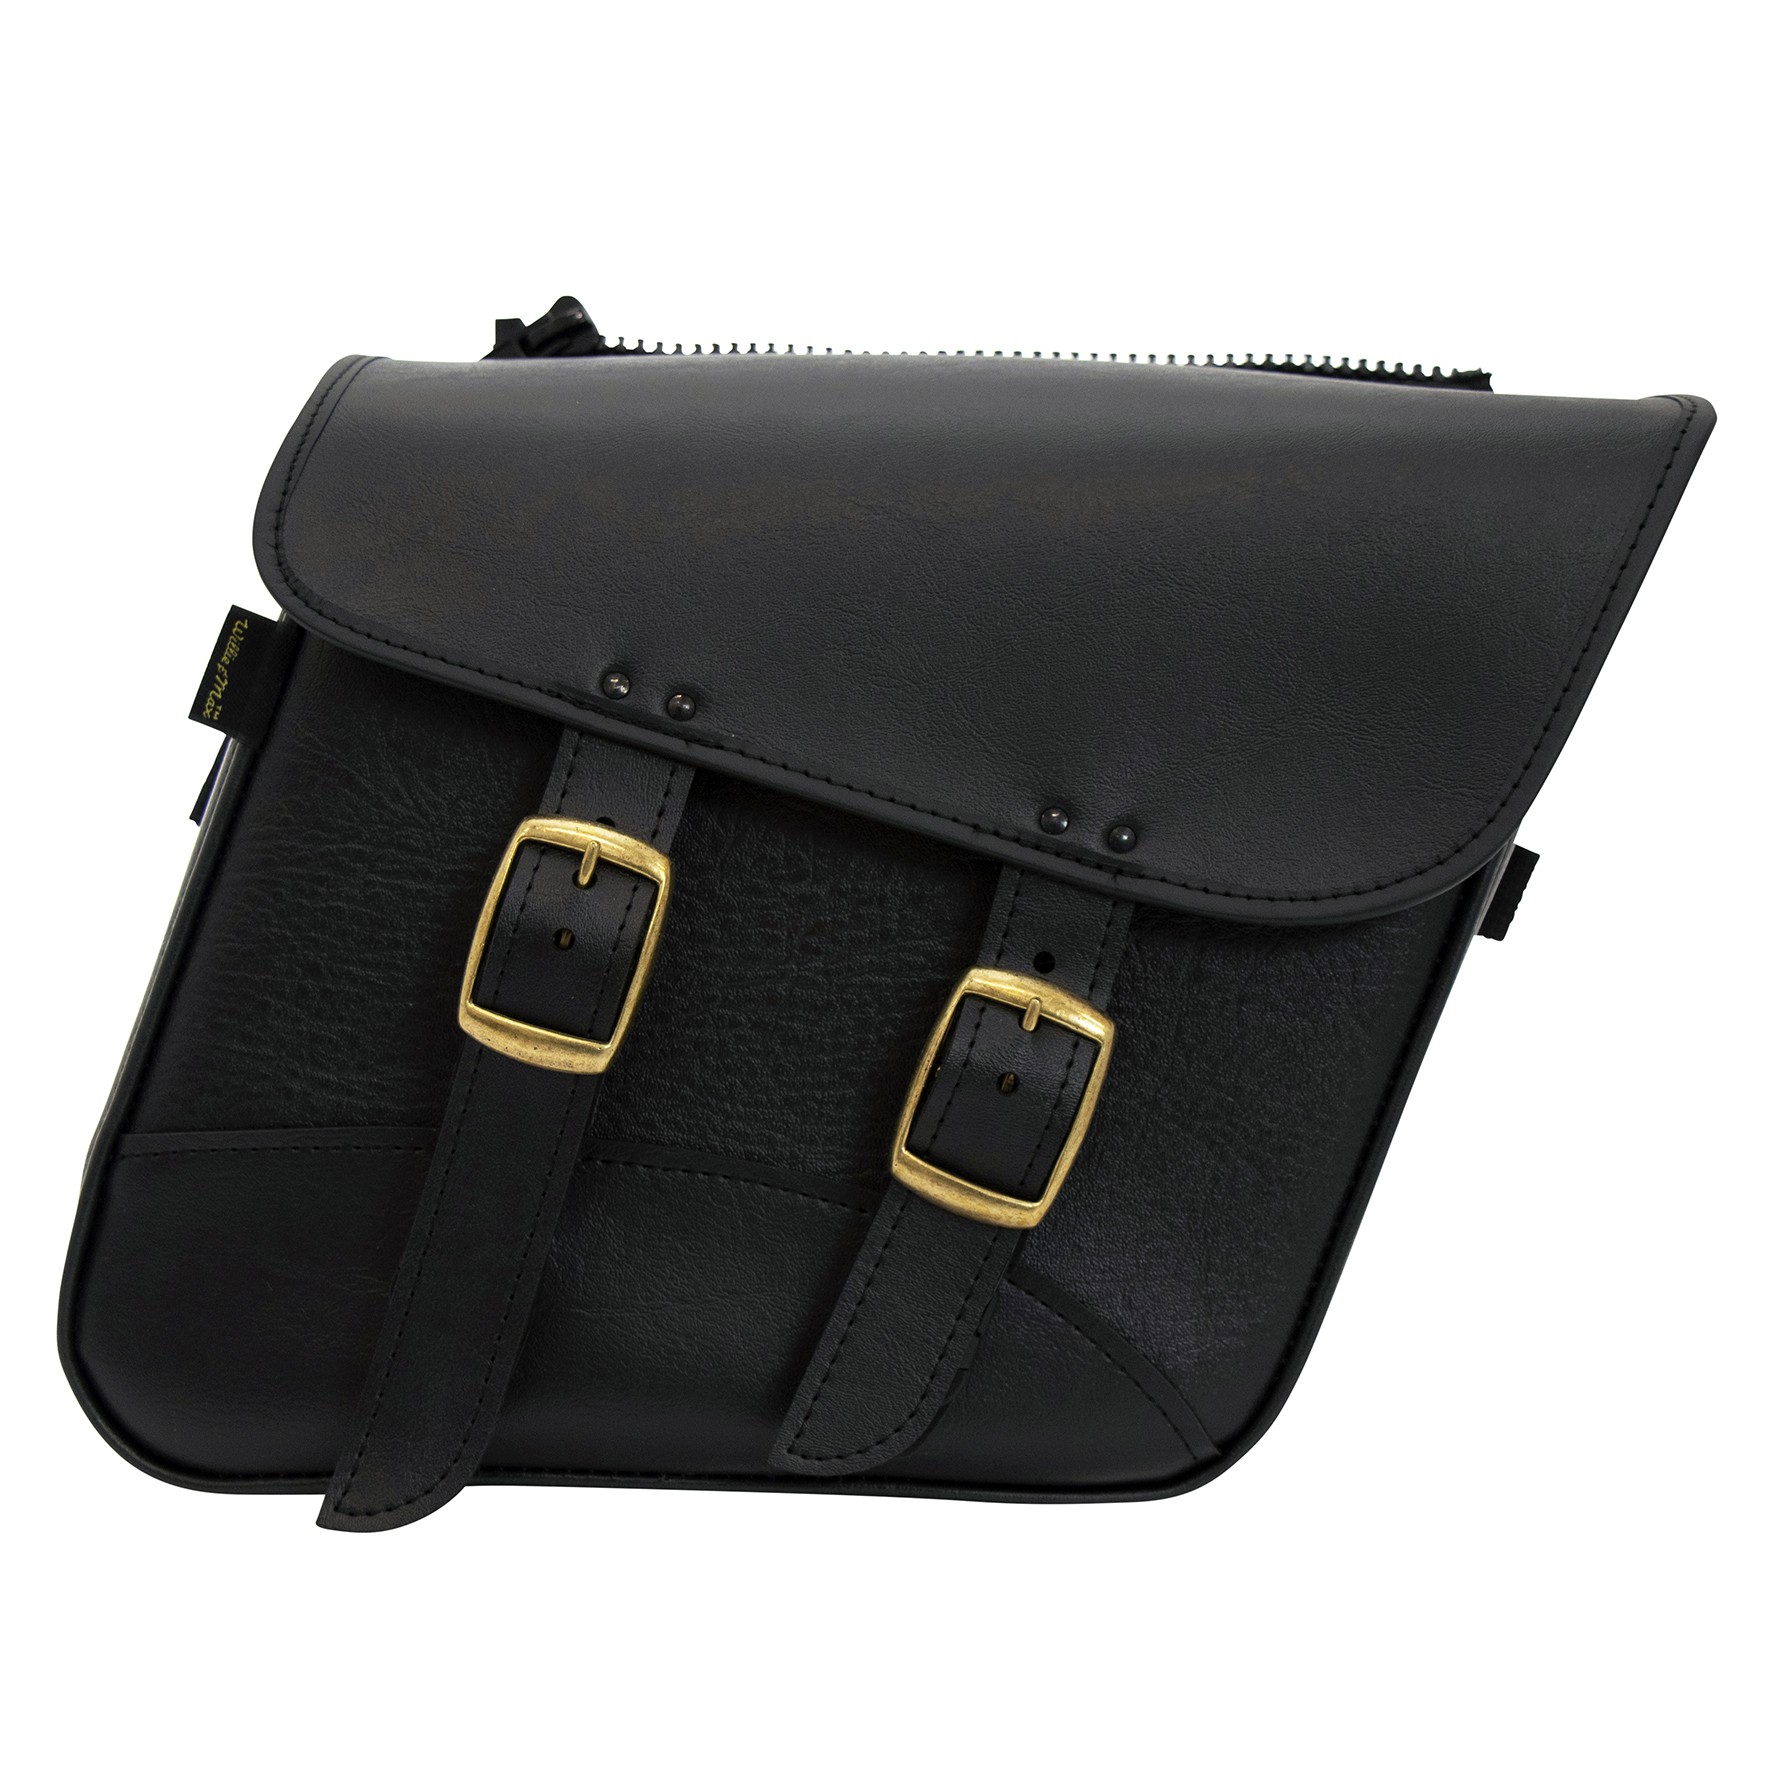 Compact Slant Black Saddlebags with Brass Buckles